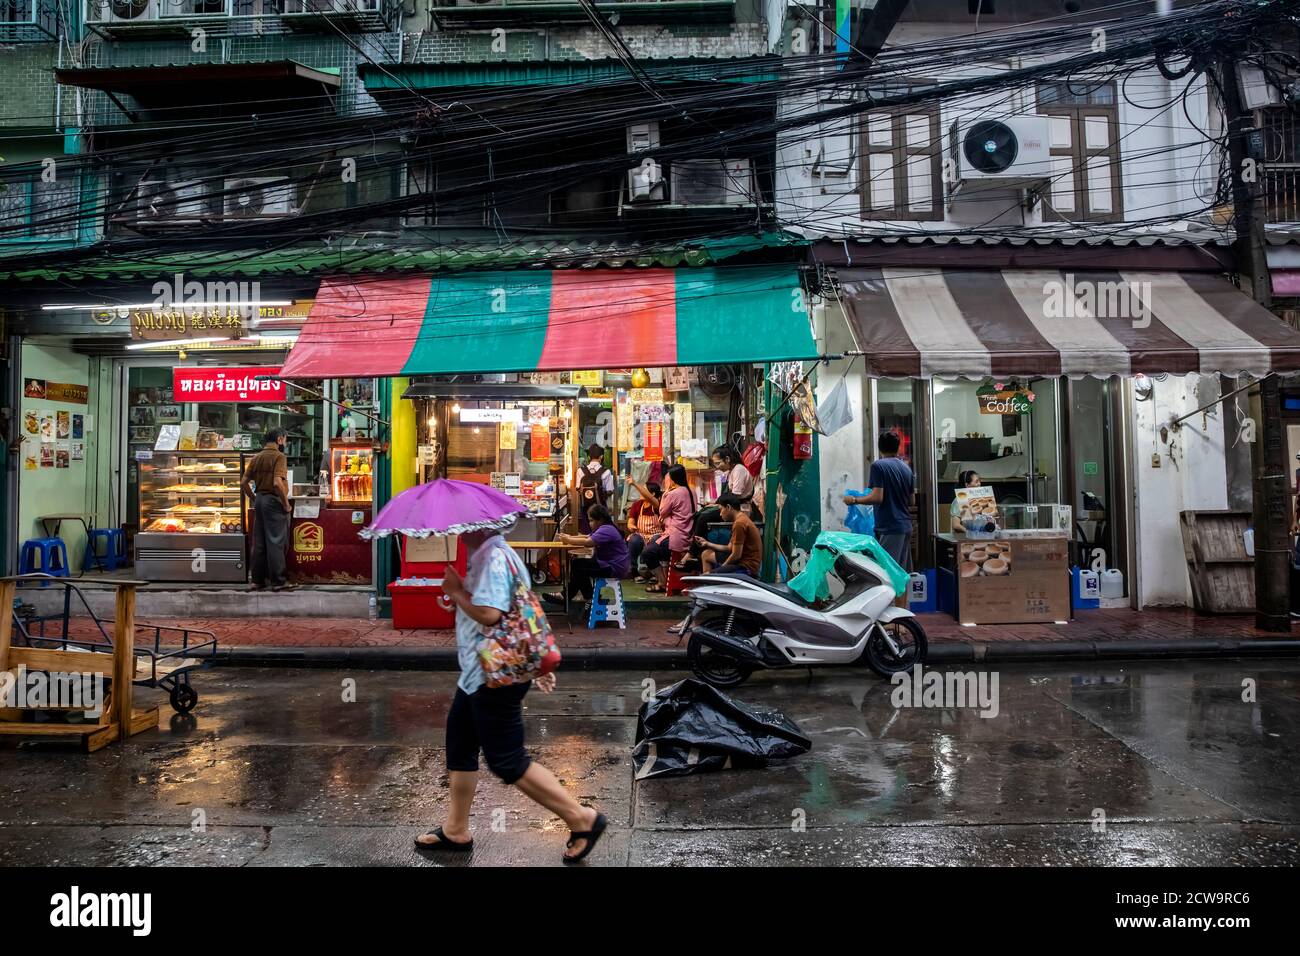 A man walks down the street with a small purple umbrella in Bangkok's Chinatown. Stock Photo